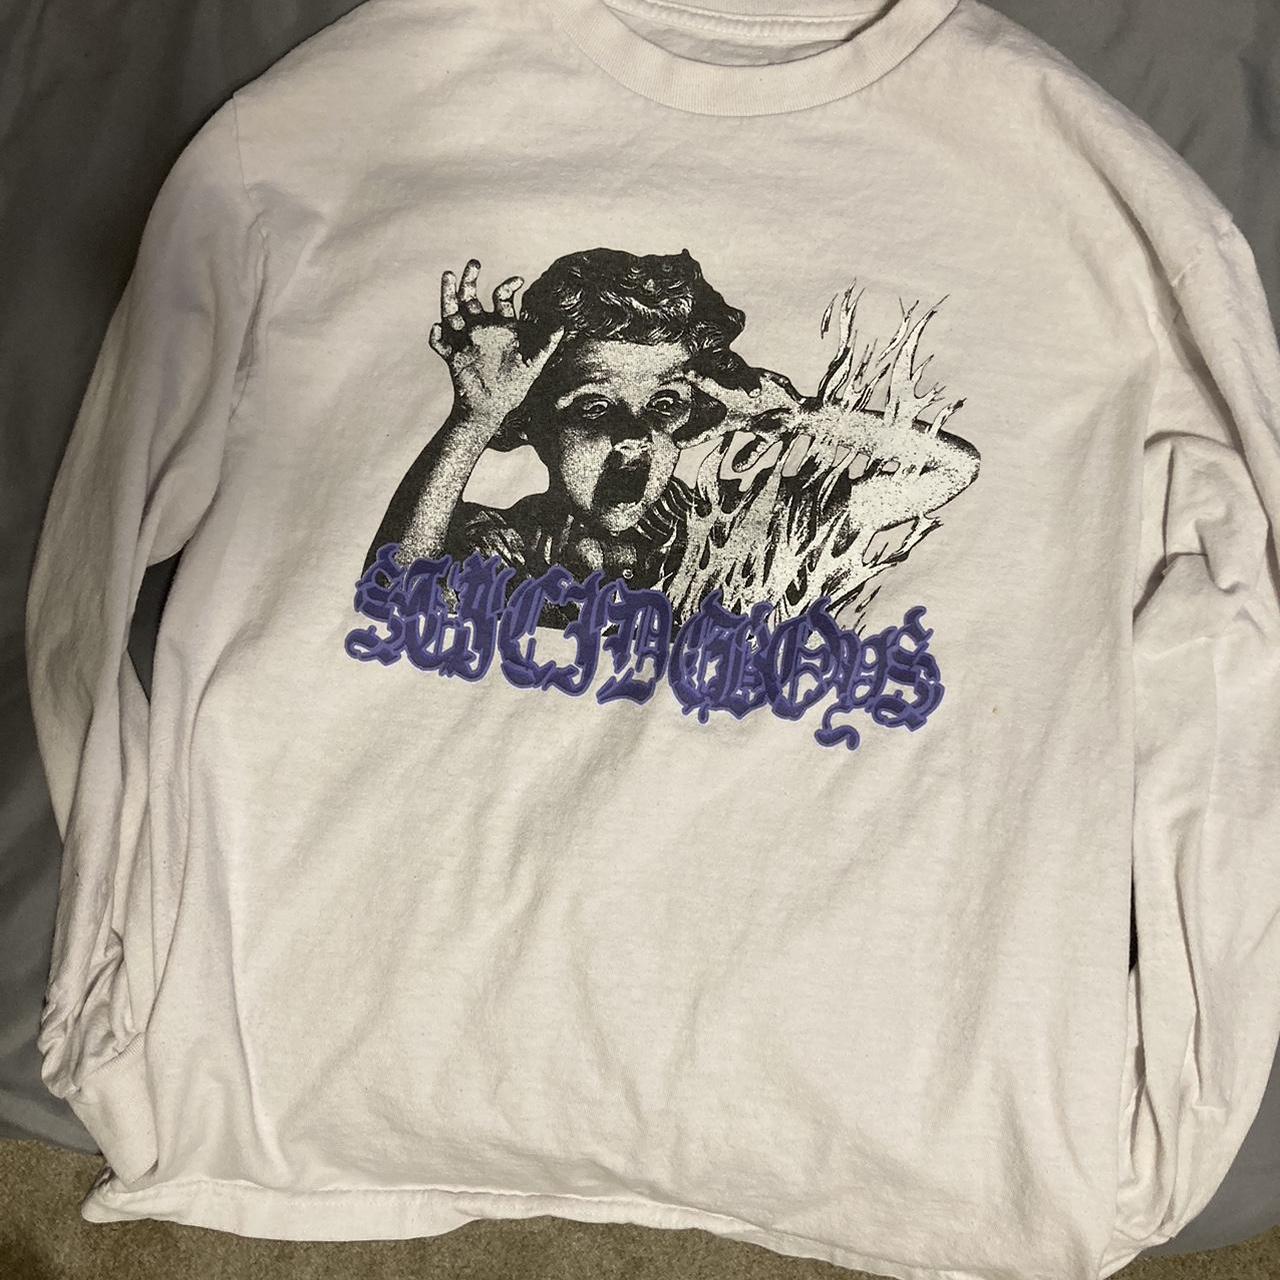 Join the Suicideboys Fandom with Our Merchandise